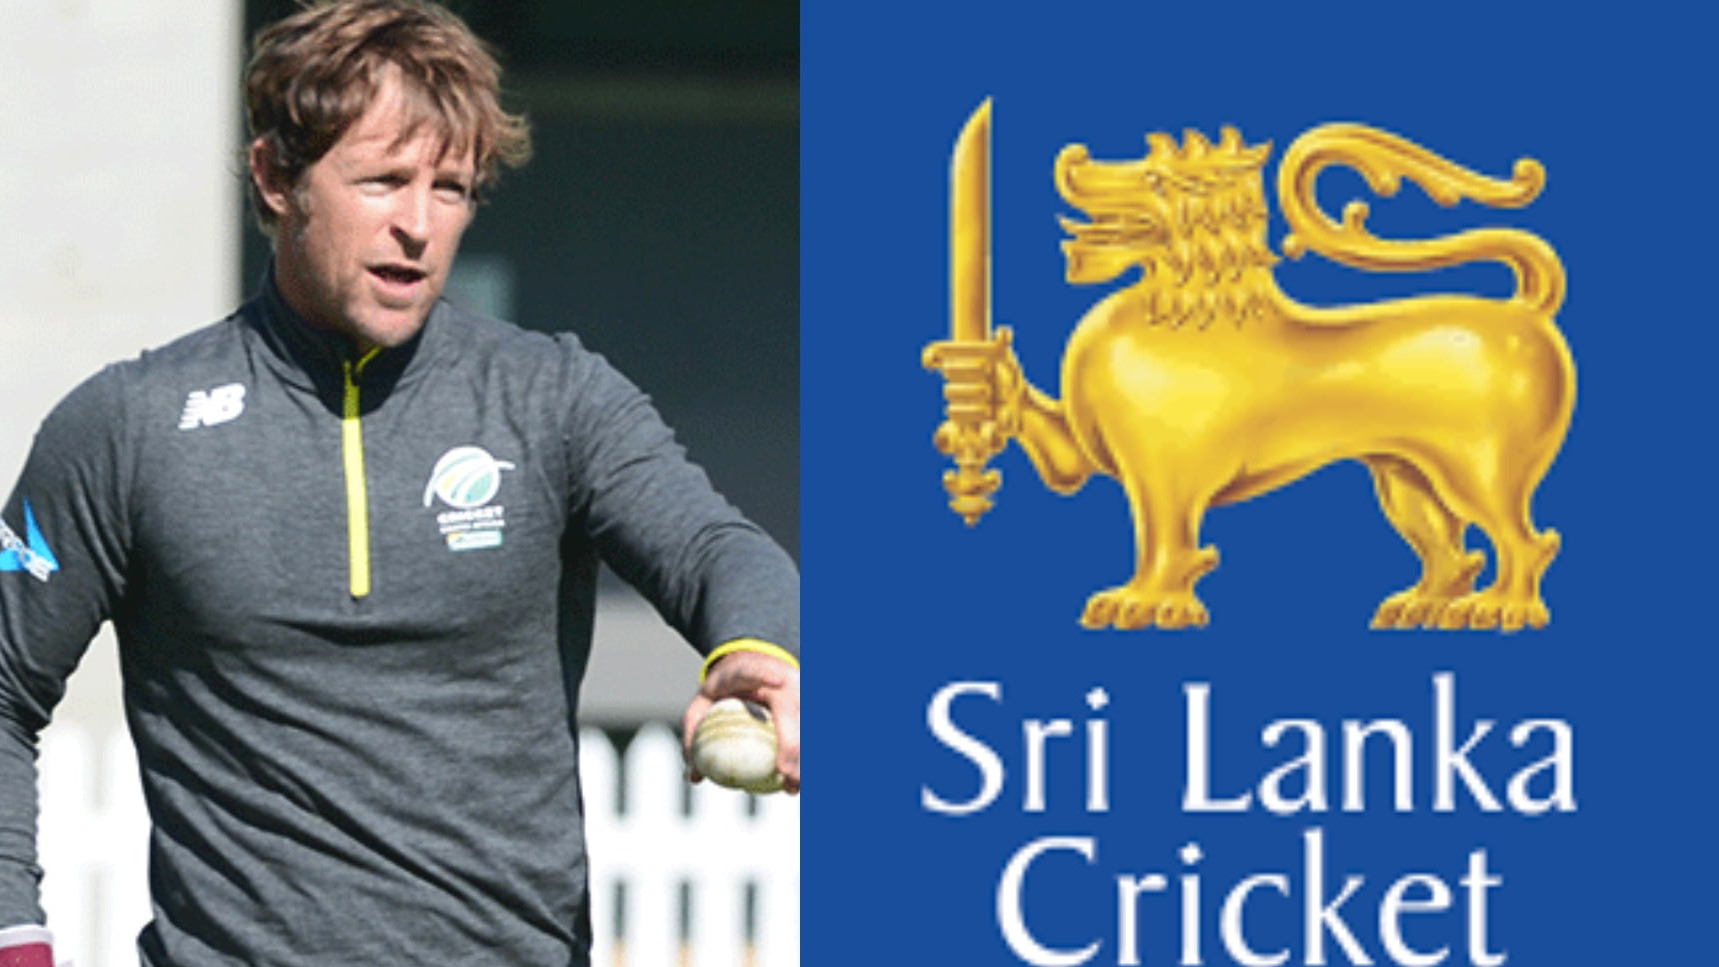 “News to me” - Jonty Rhodes reacts to Sri Lanka board announcing him as fielding consultant